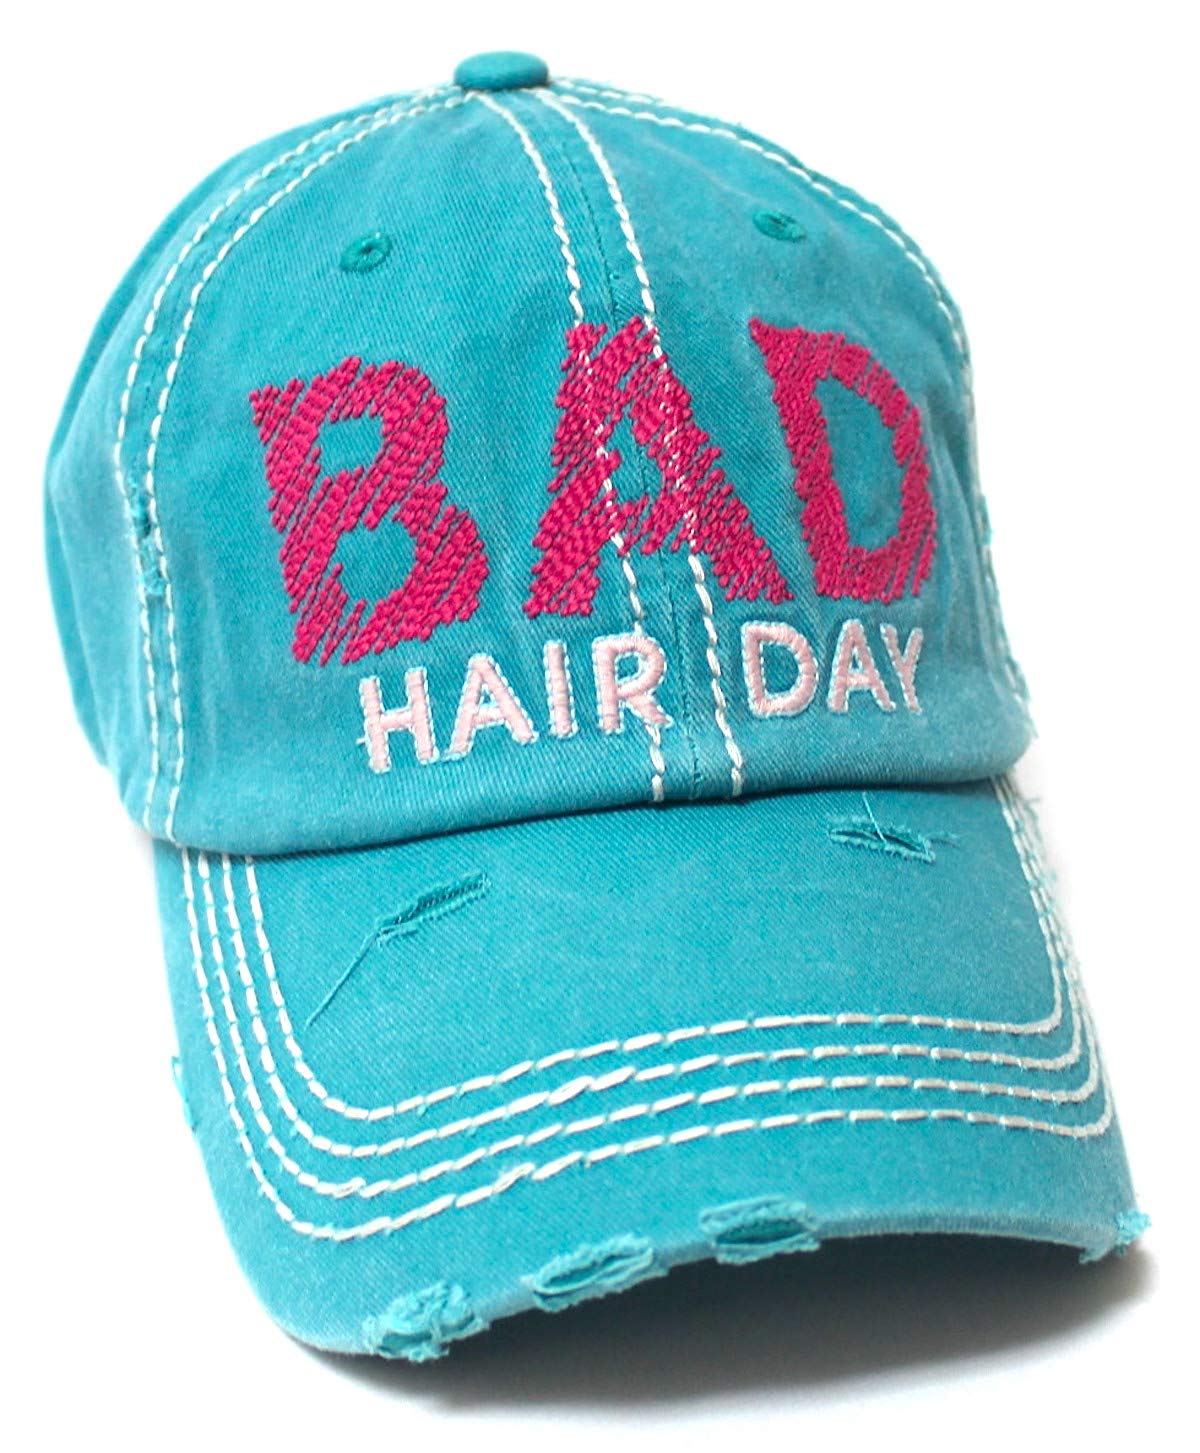 CAPS 'N VINTAGE Bad Hair Day Stitch Embroidery Distressed Baseball Hat, Turquoise Blue - Caps 'N Vintage 